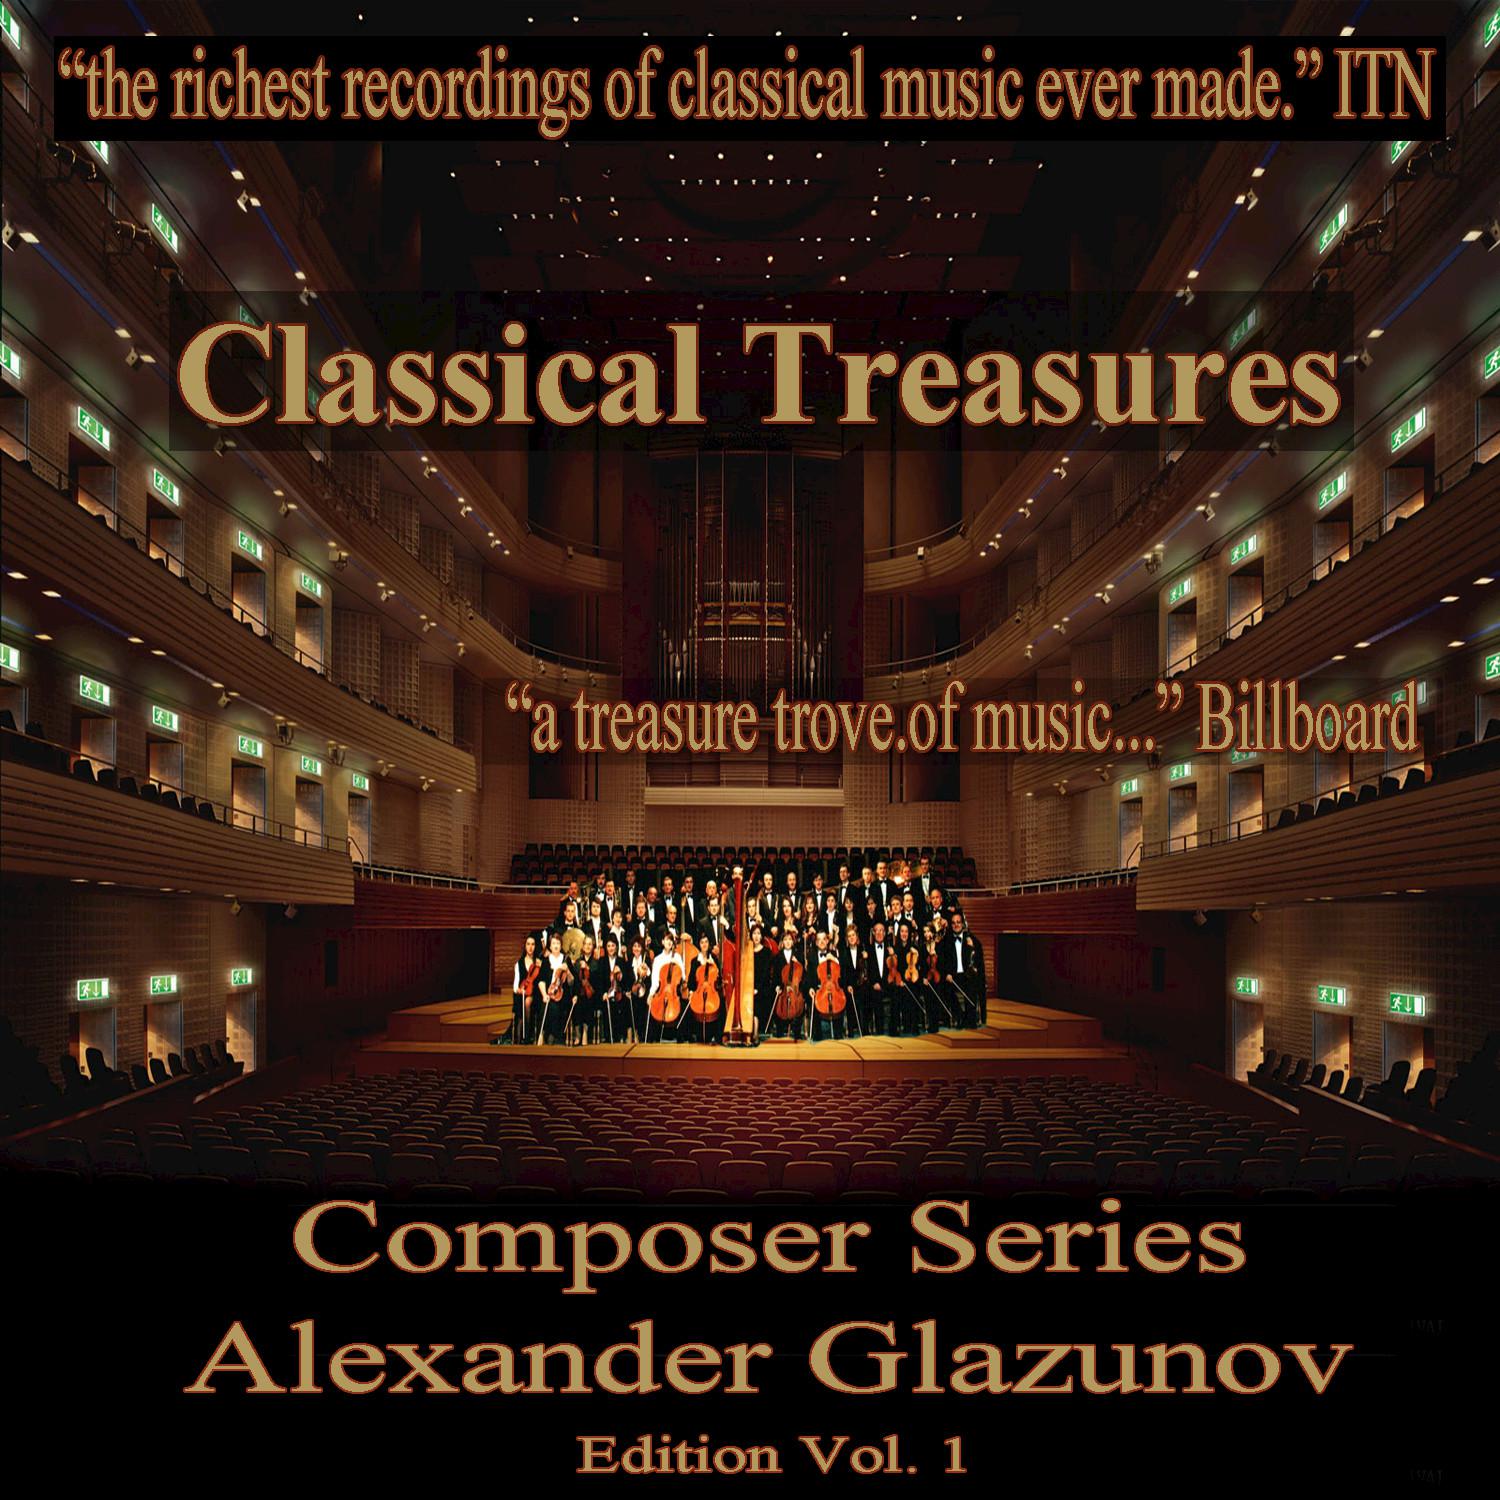 Concert Waltzes for Orchestra No. 2 in F Major, Op. 51